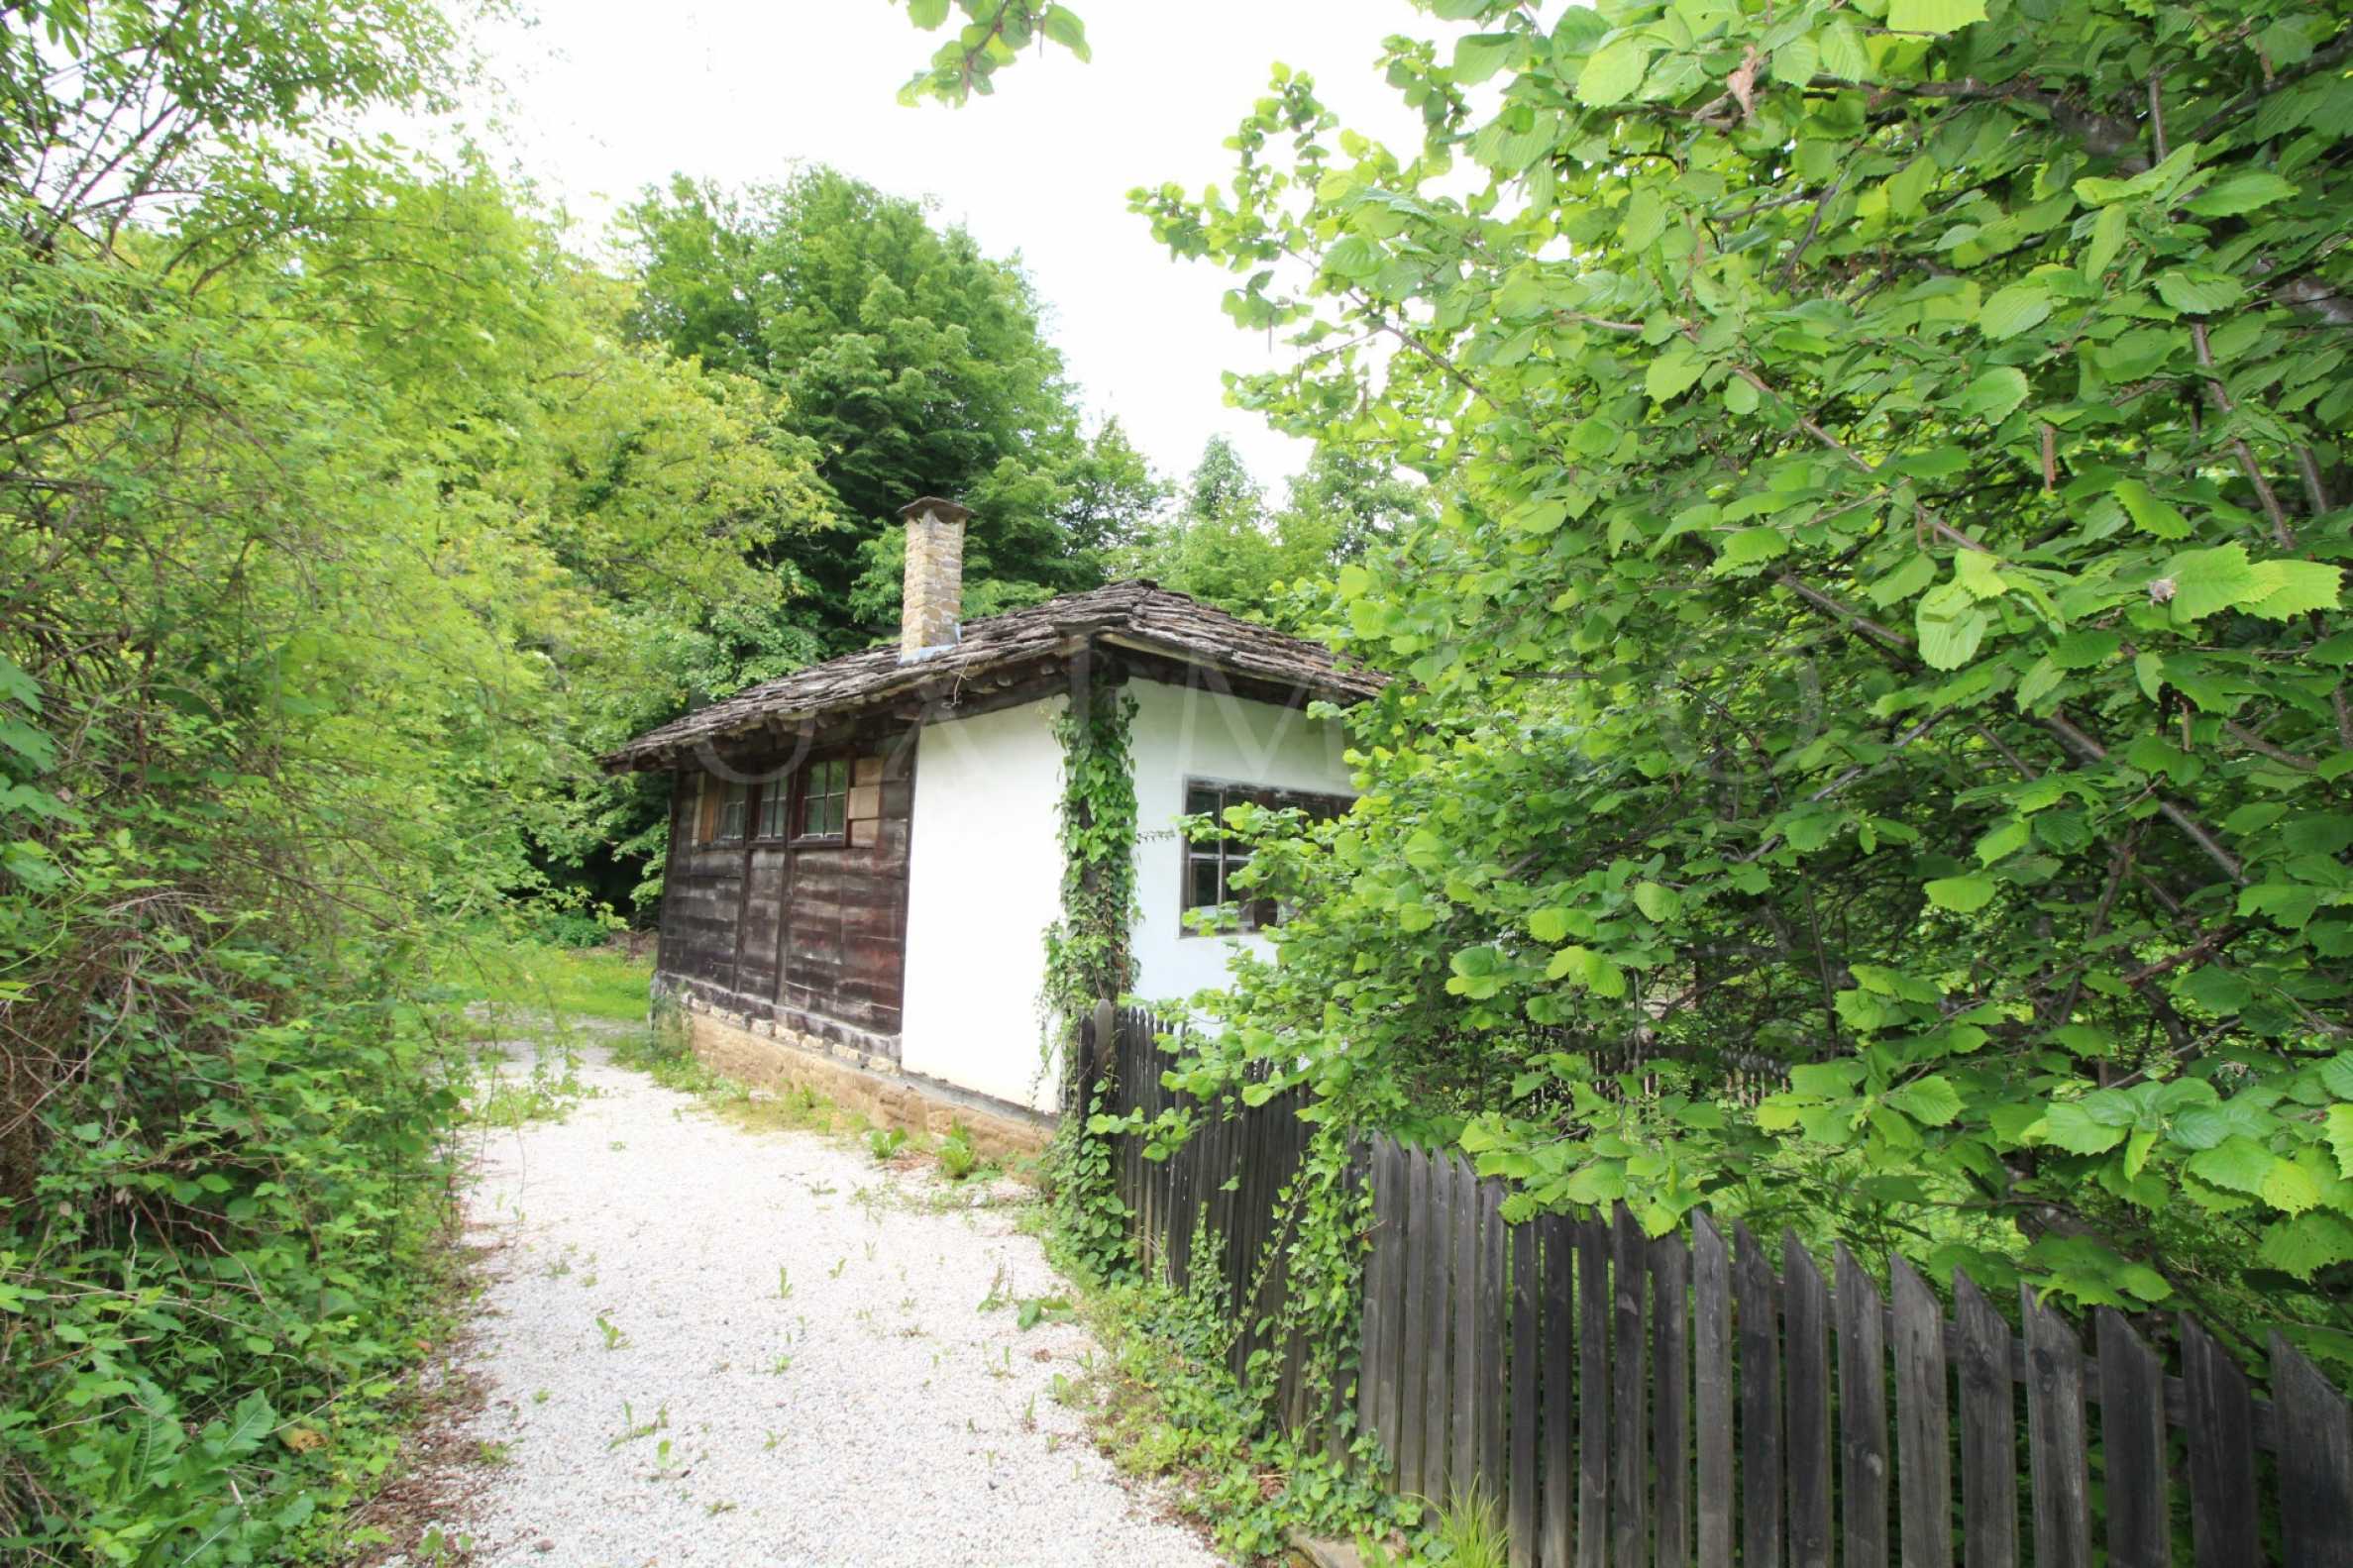 House for sale near Gabrovo, Bulgaria. For sale - house. House in ...